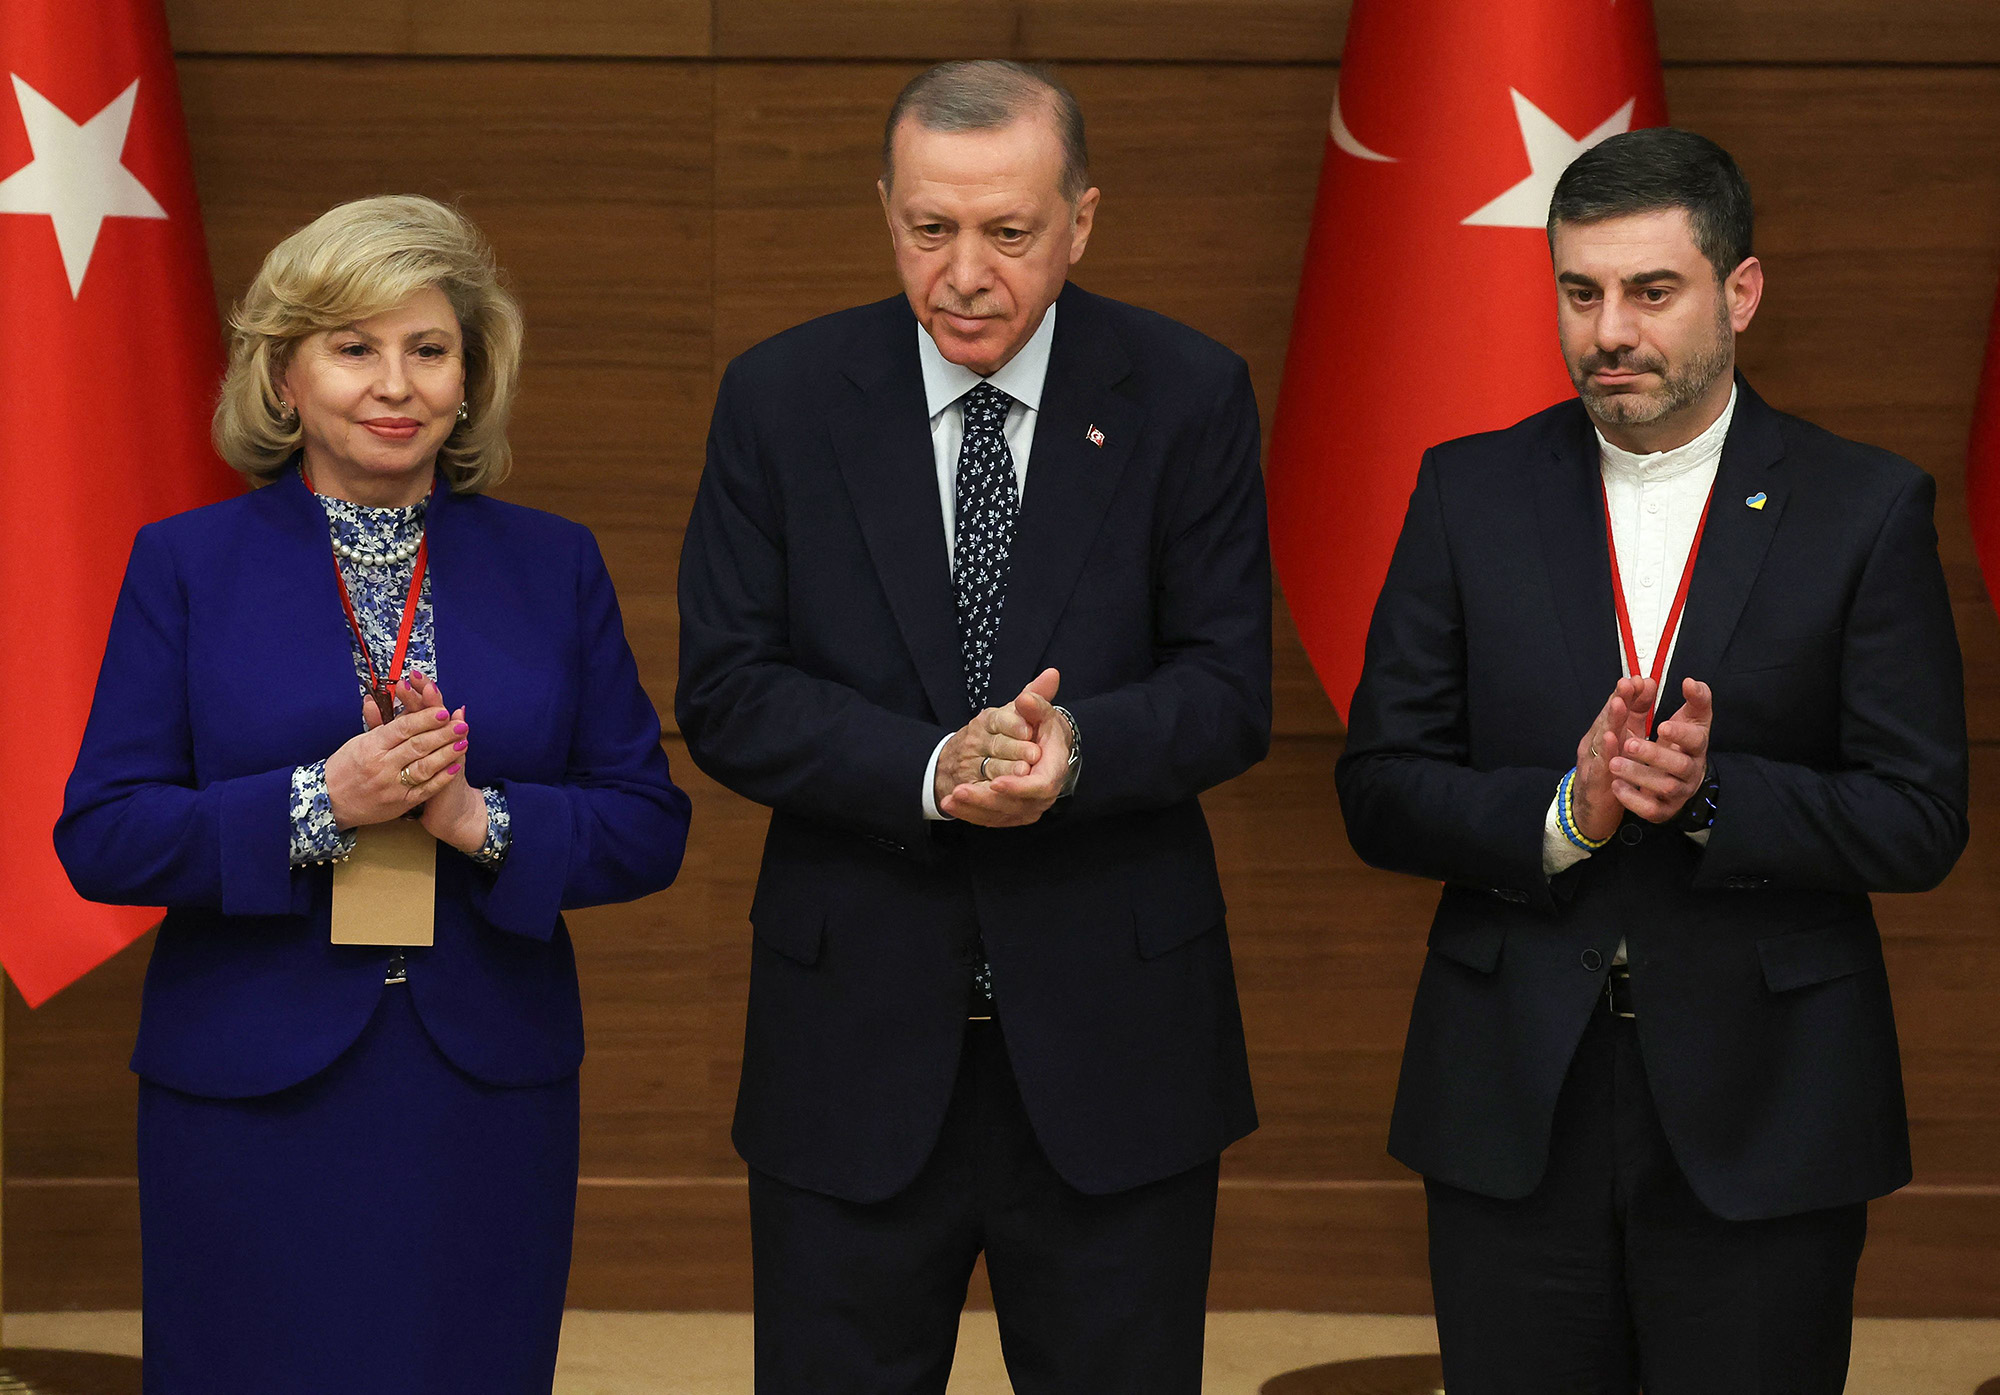 Turkish President Recep Tayyip Erdogan, center, Ukrainian Parliament Commissioner for Human Rights Dmytro Lubinets, right and High Commissioner for Human Rights of the Russian Federation Tatyana Moskalkova applaud as they attend the International Ombudsman Conference at the presidential complex in Ankara, Turkey, on January 11.